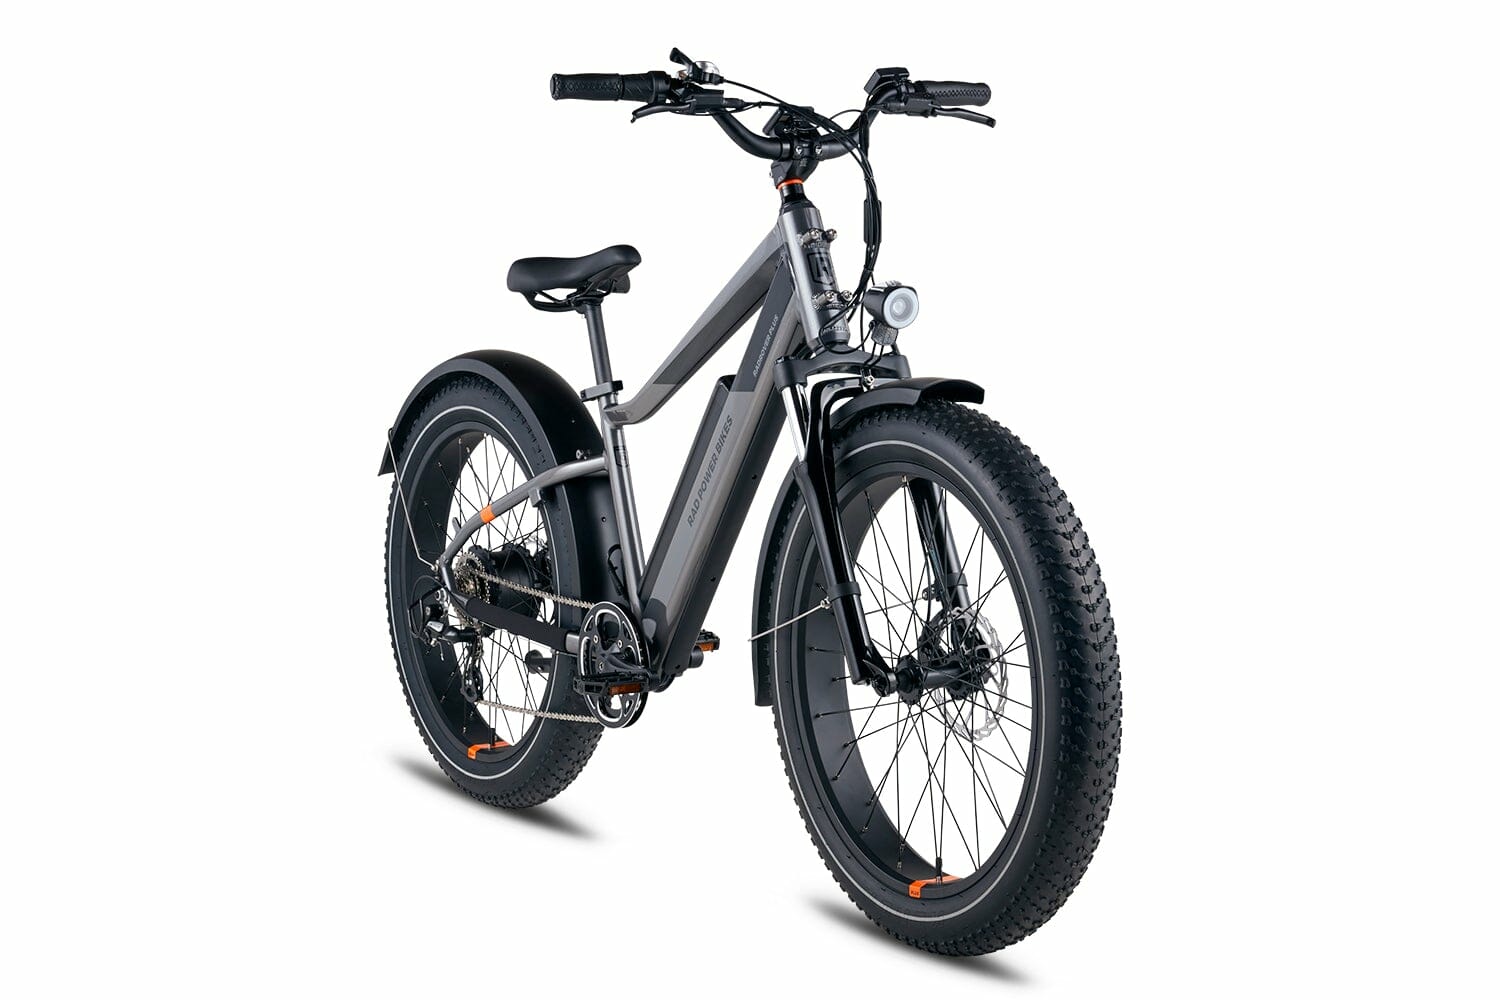 RadRover 6 Review: The Next Generation of the World's Best-Selling Fat Tire eBike 2